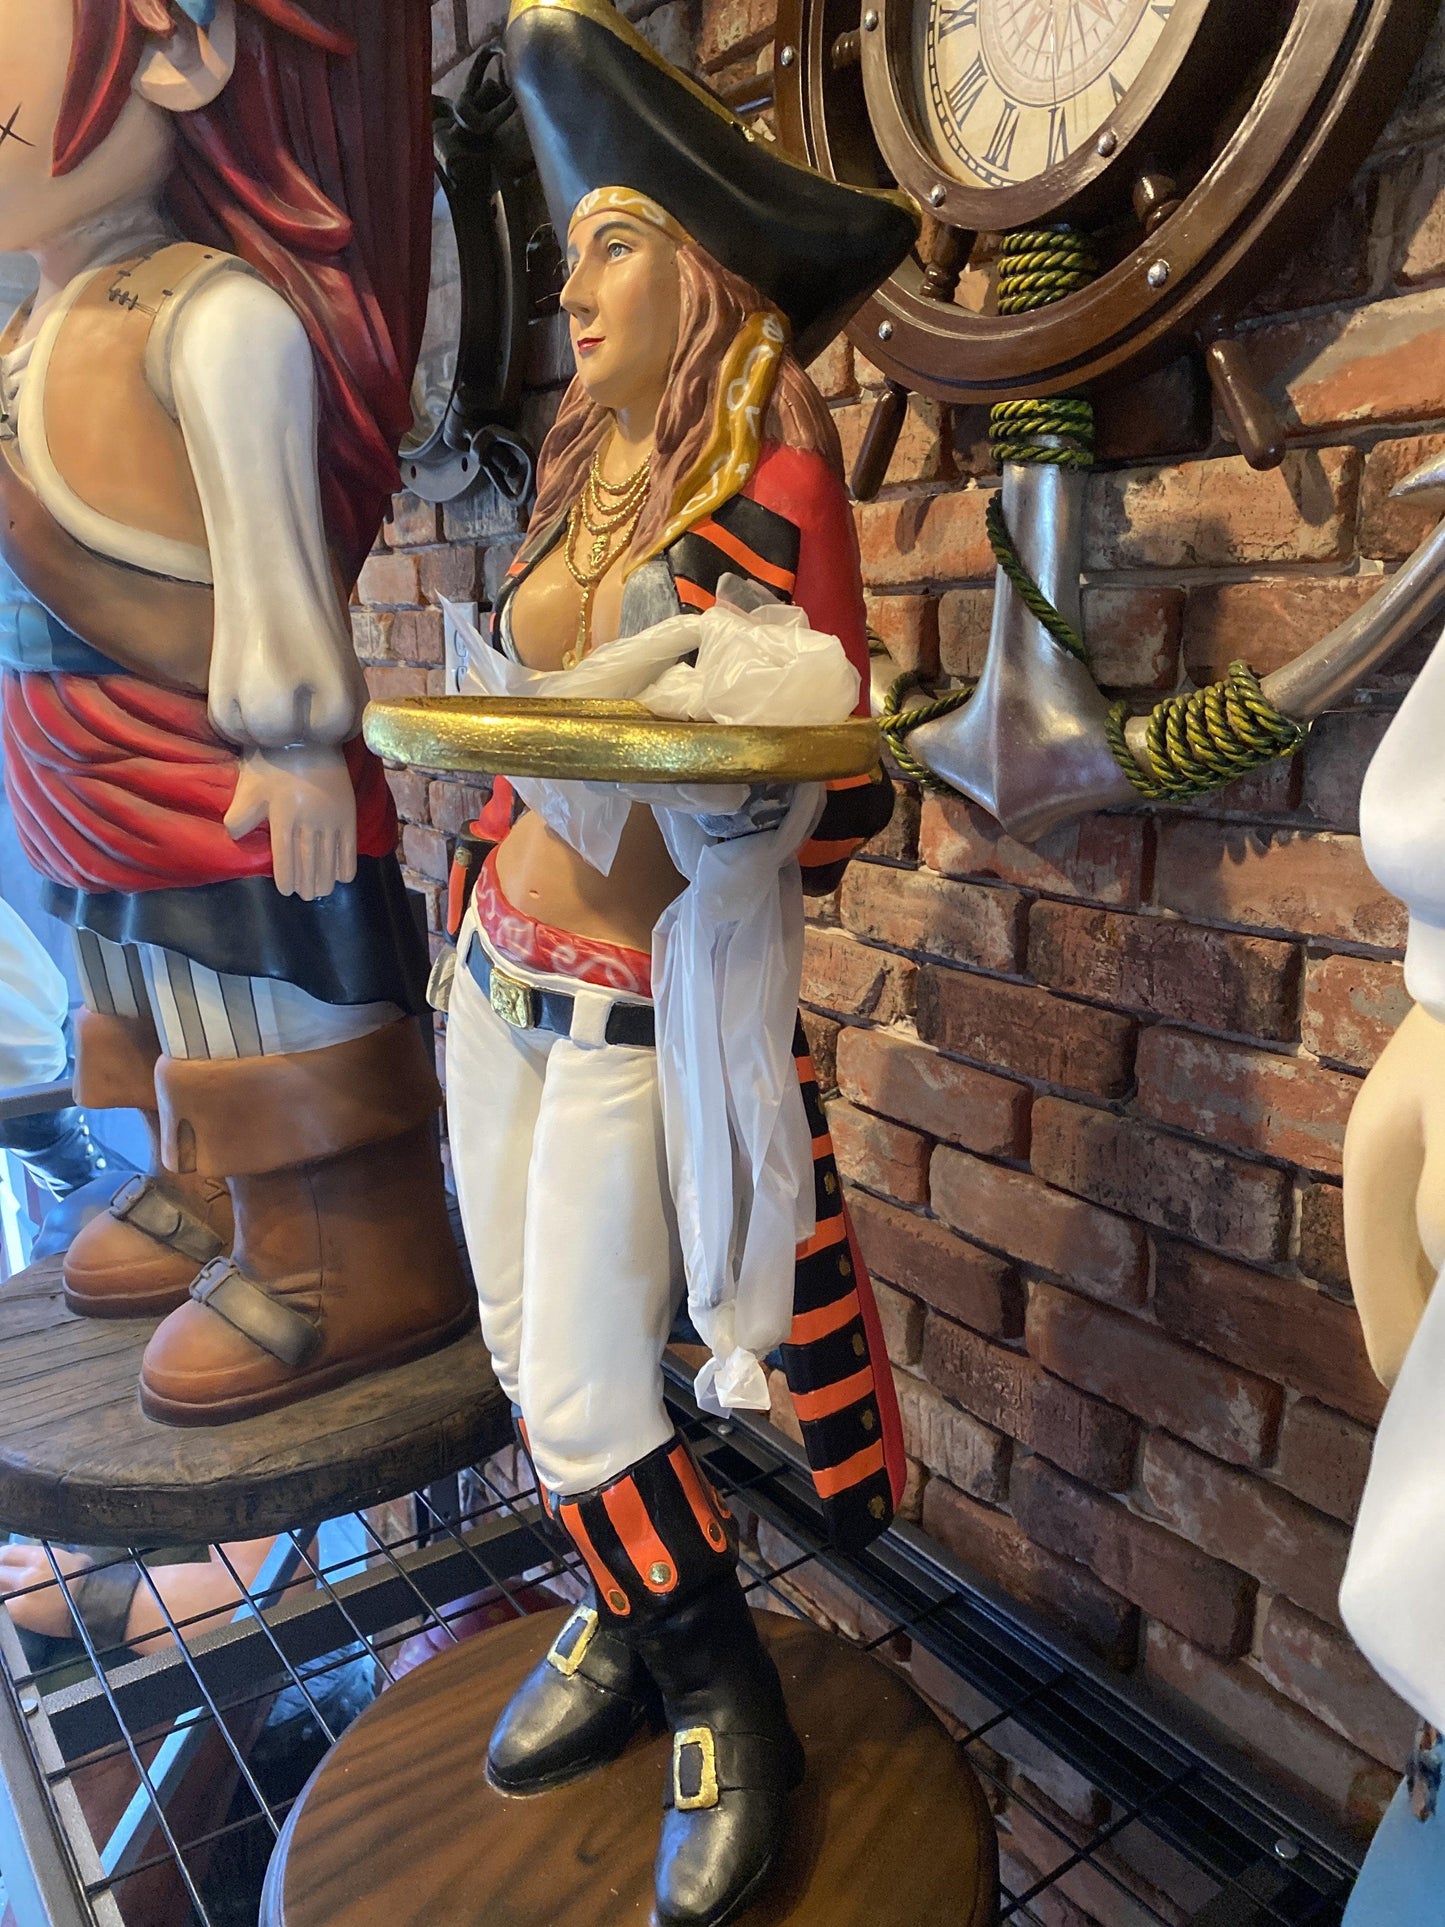 Lady Pirate Butler Small Statue - LM Treasures Prop Rentals 